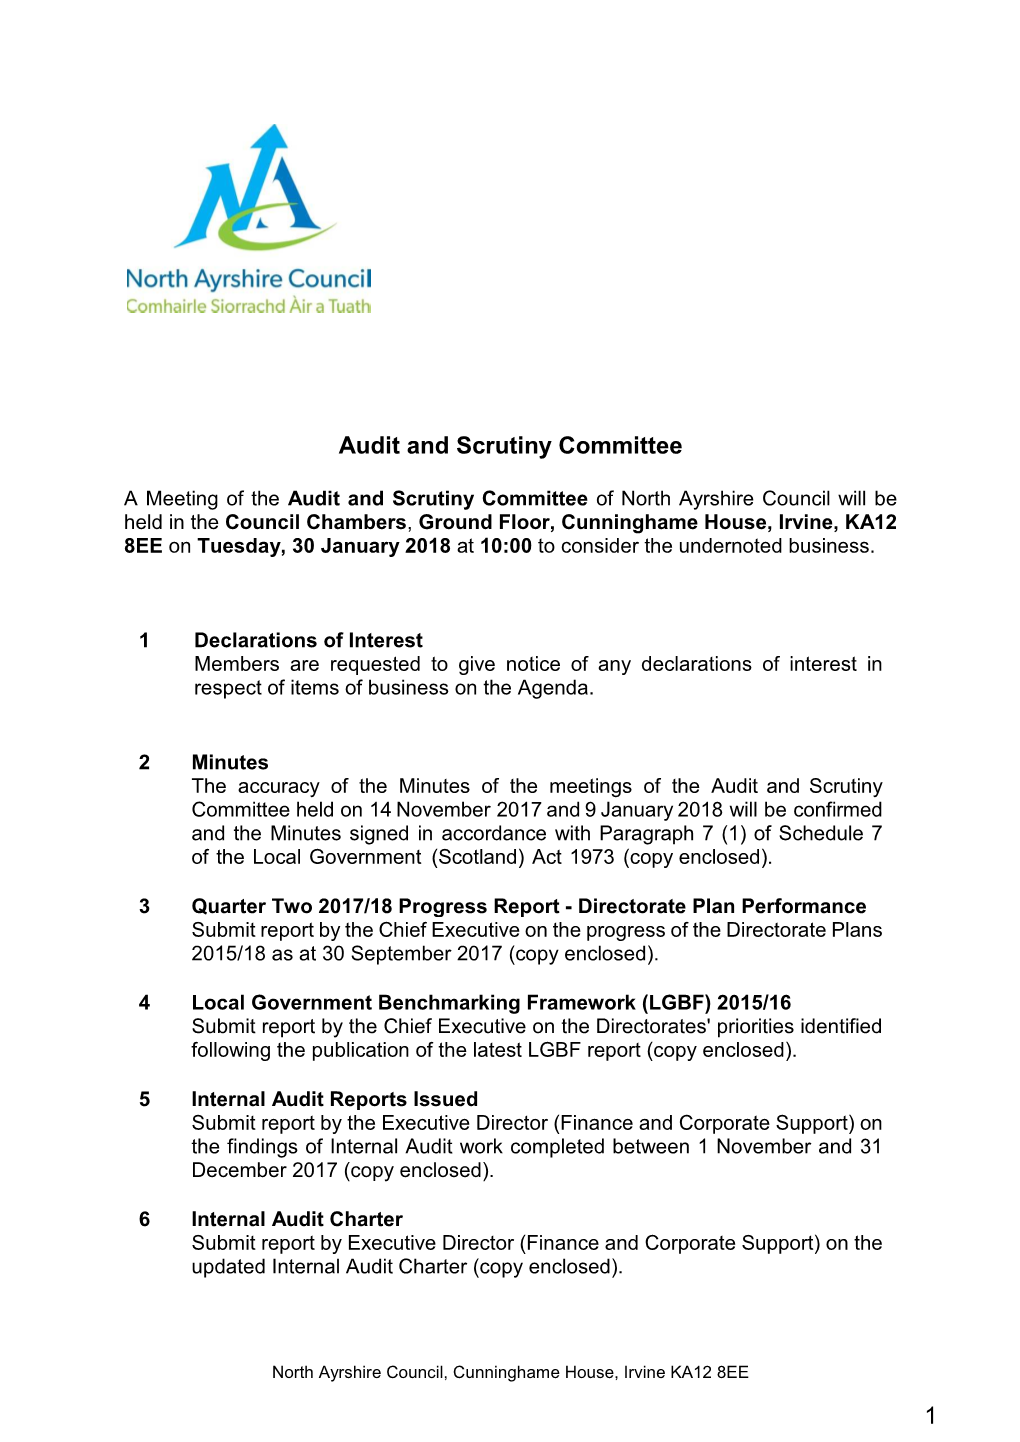 Audit and Scrutiny Committee 14 November 2017